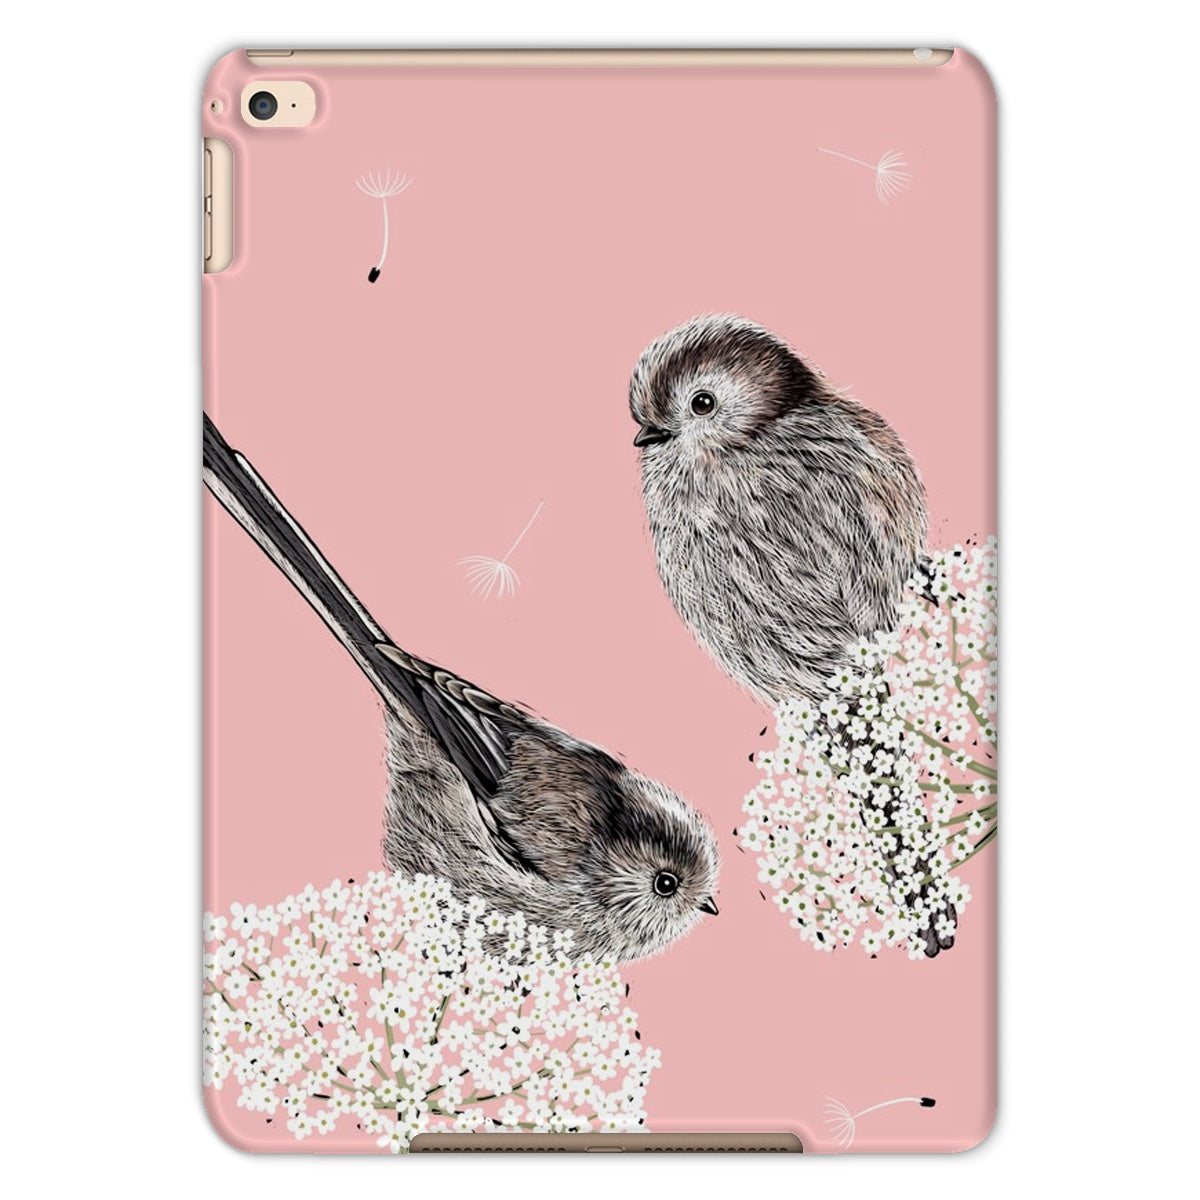 Long Tailed Tits Tablet Case